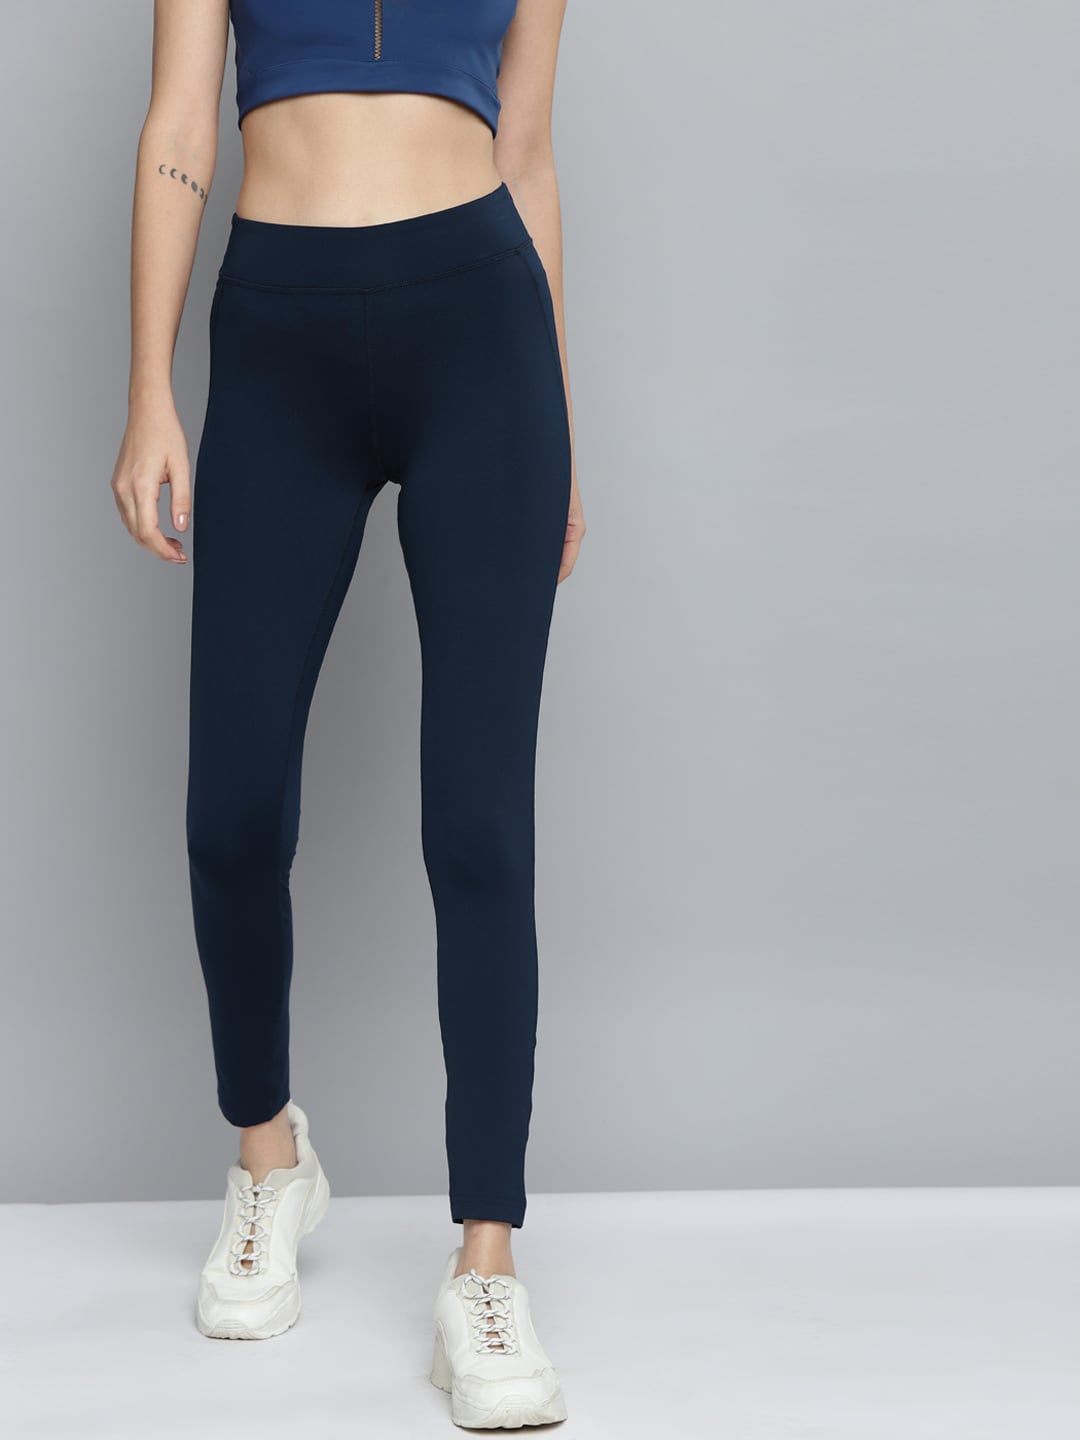 Reebok Women Navy Blue Solid Training Tights Price in India